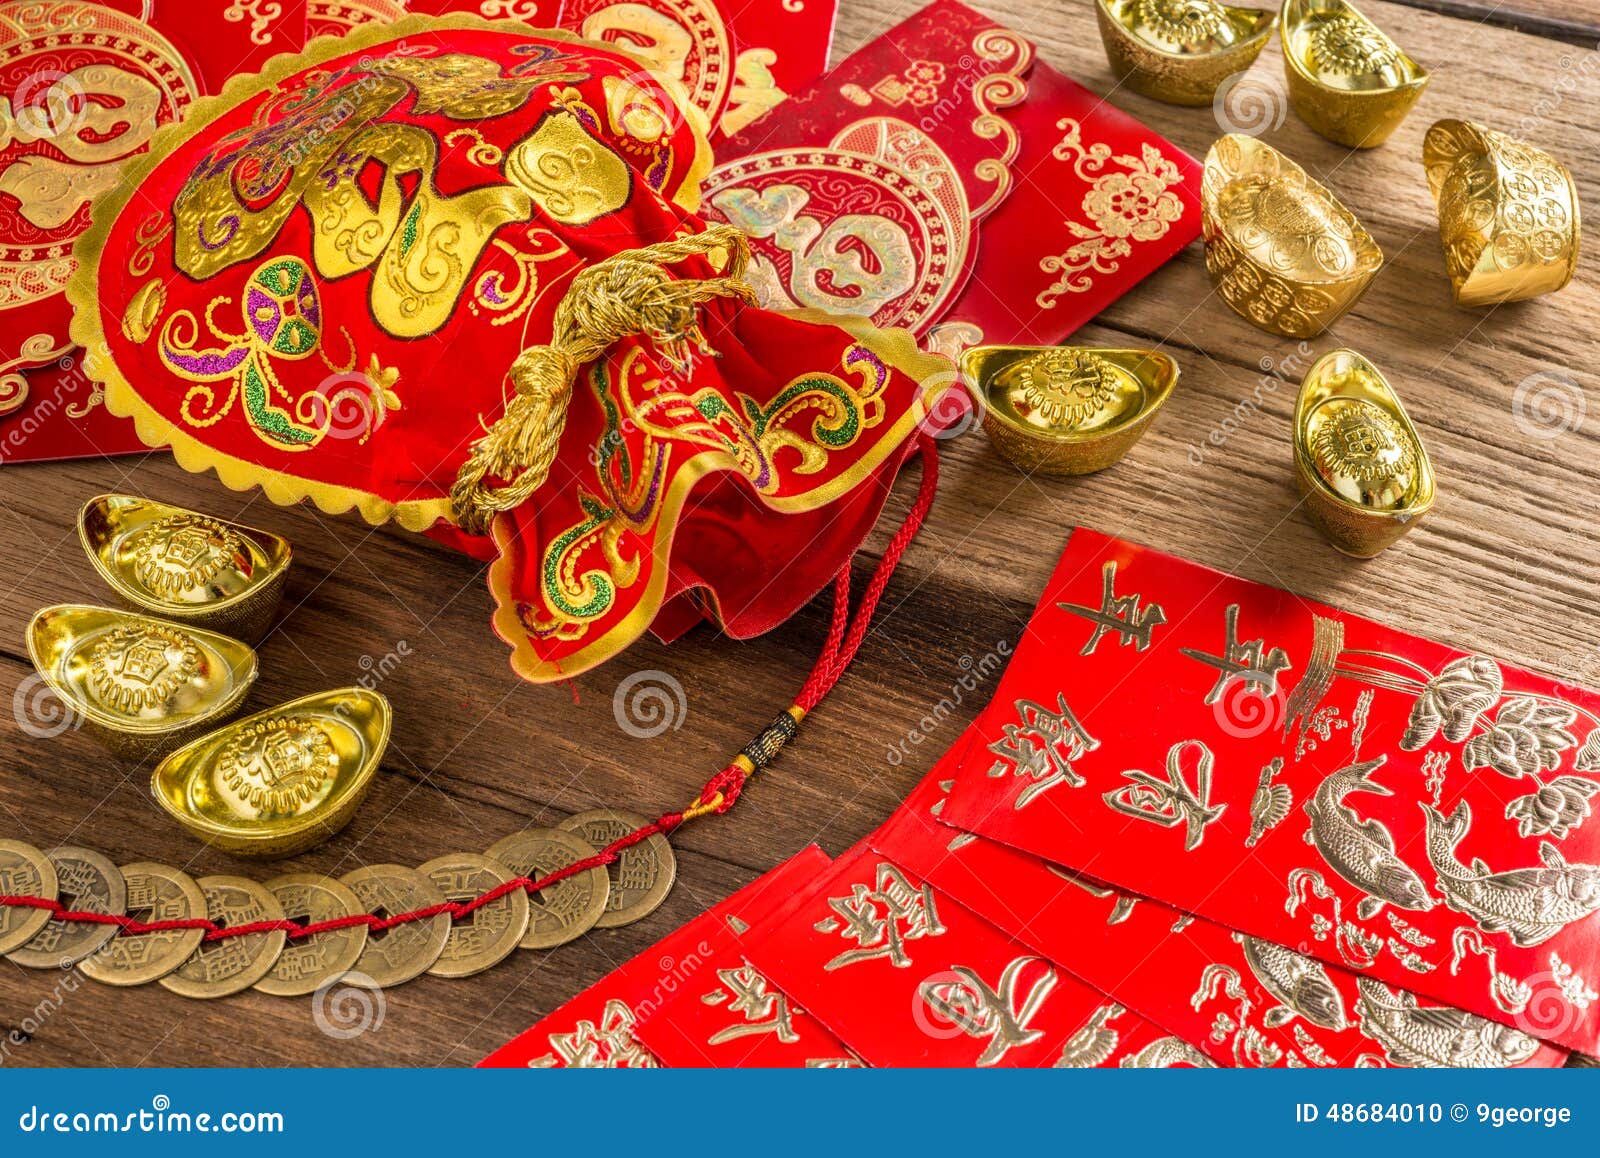 Chinese New Year Decoration,Chinese Red Bag And Golden Bullion Stock Photo - Image ...